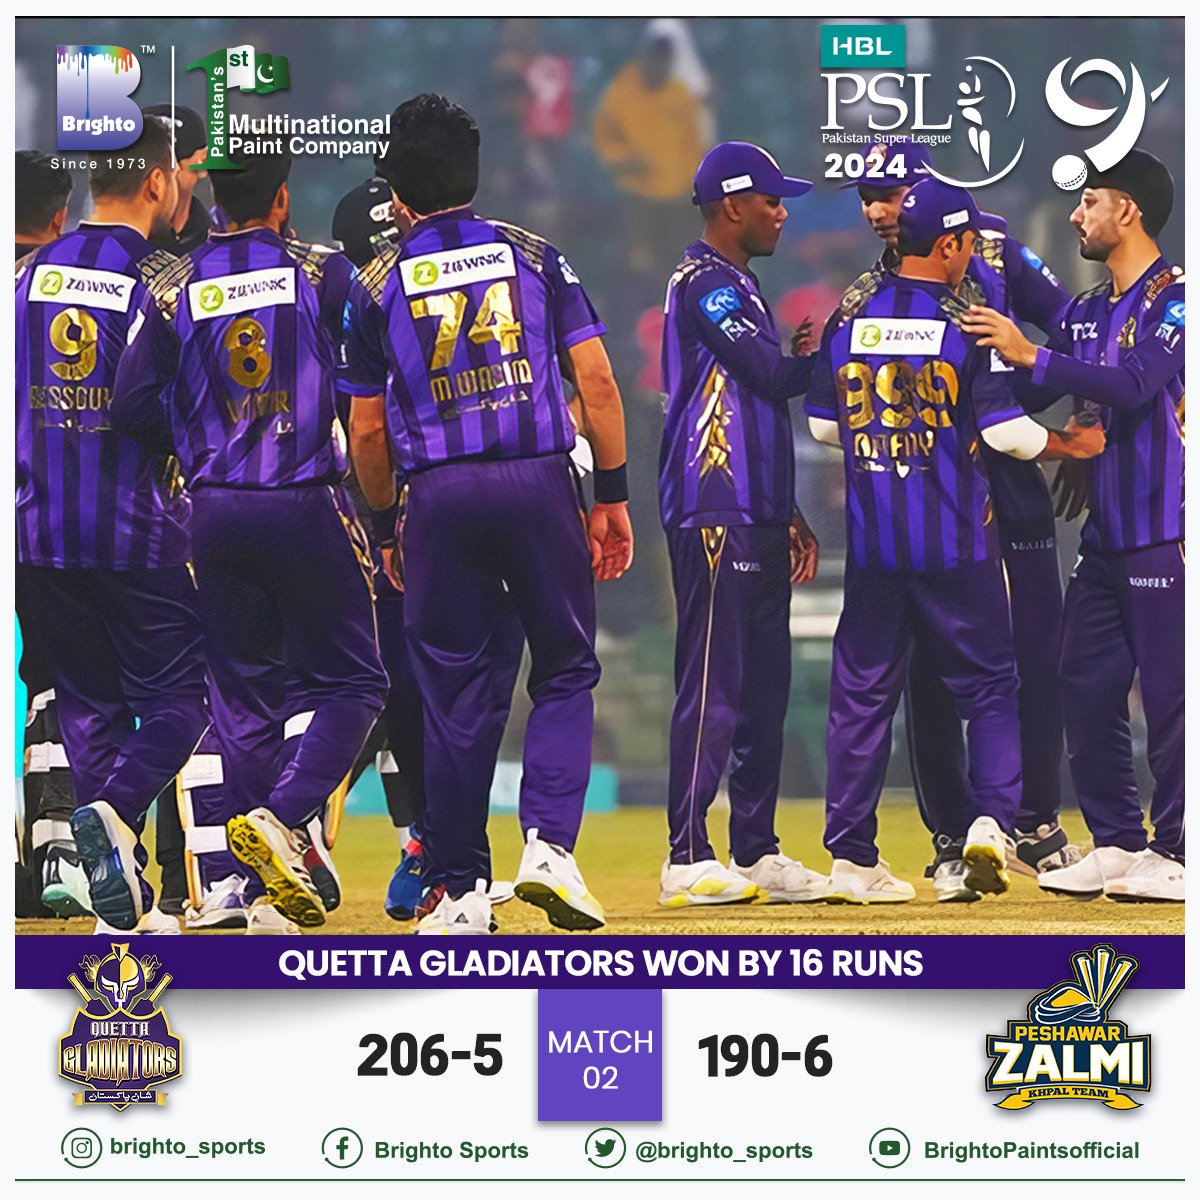 Quetta Gladiators won the match by 16 runs and defeated team Peshawar Zalmi in the 2nd match of PSL 9.
#BrightoPaints #Brightoturns50 #BrightoGroup #Since1973 #BrightoSports #PSL9 #PSL2024 #Pakistan #cricketfever #50YearsOfExcellence #winner